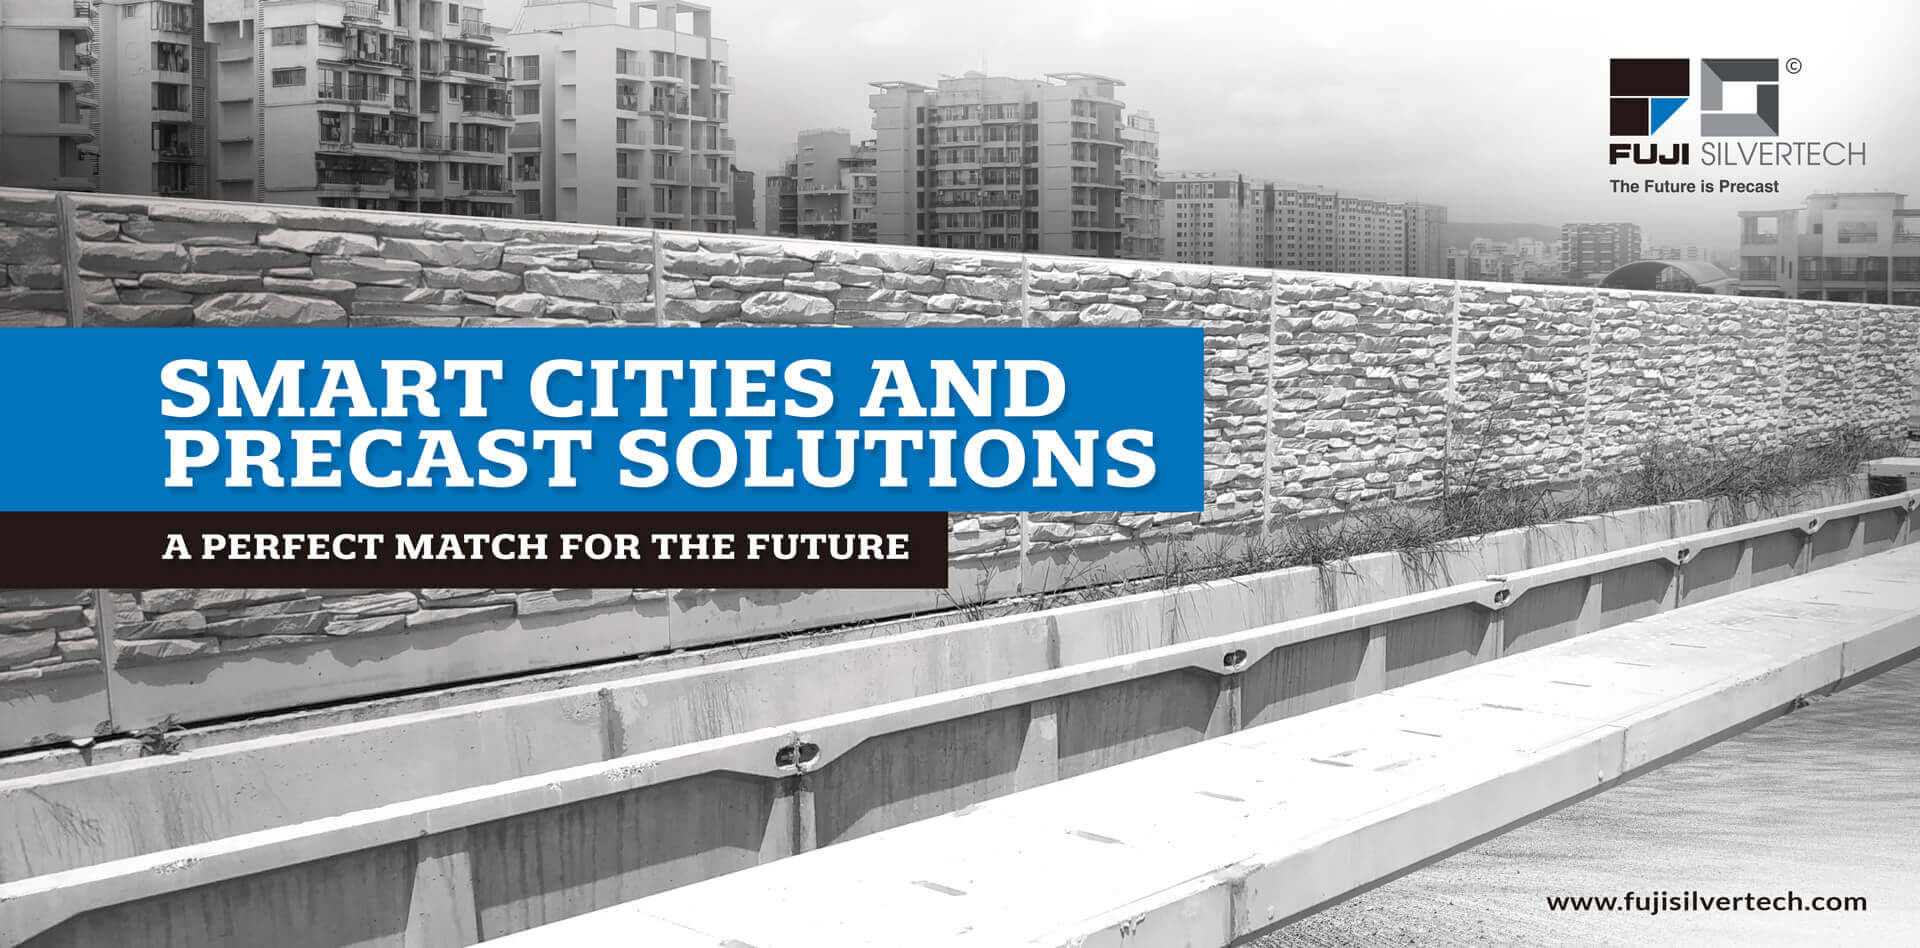 Smart Cities and Precast Solutions